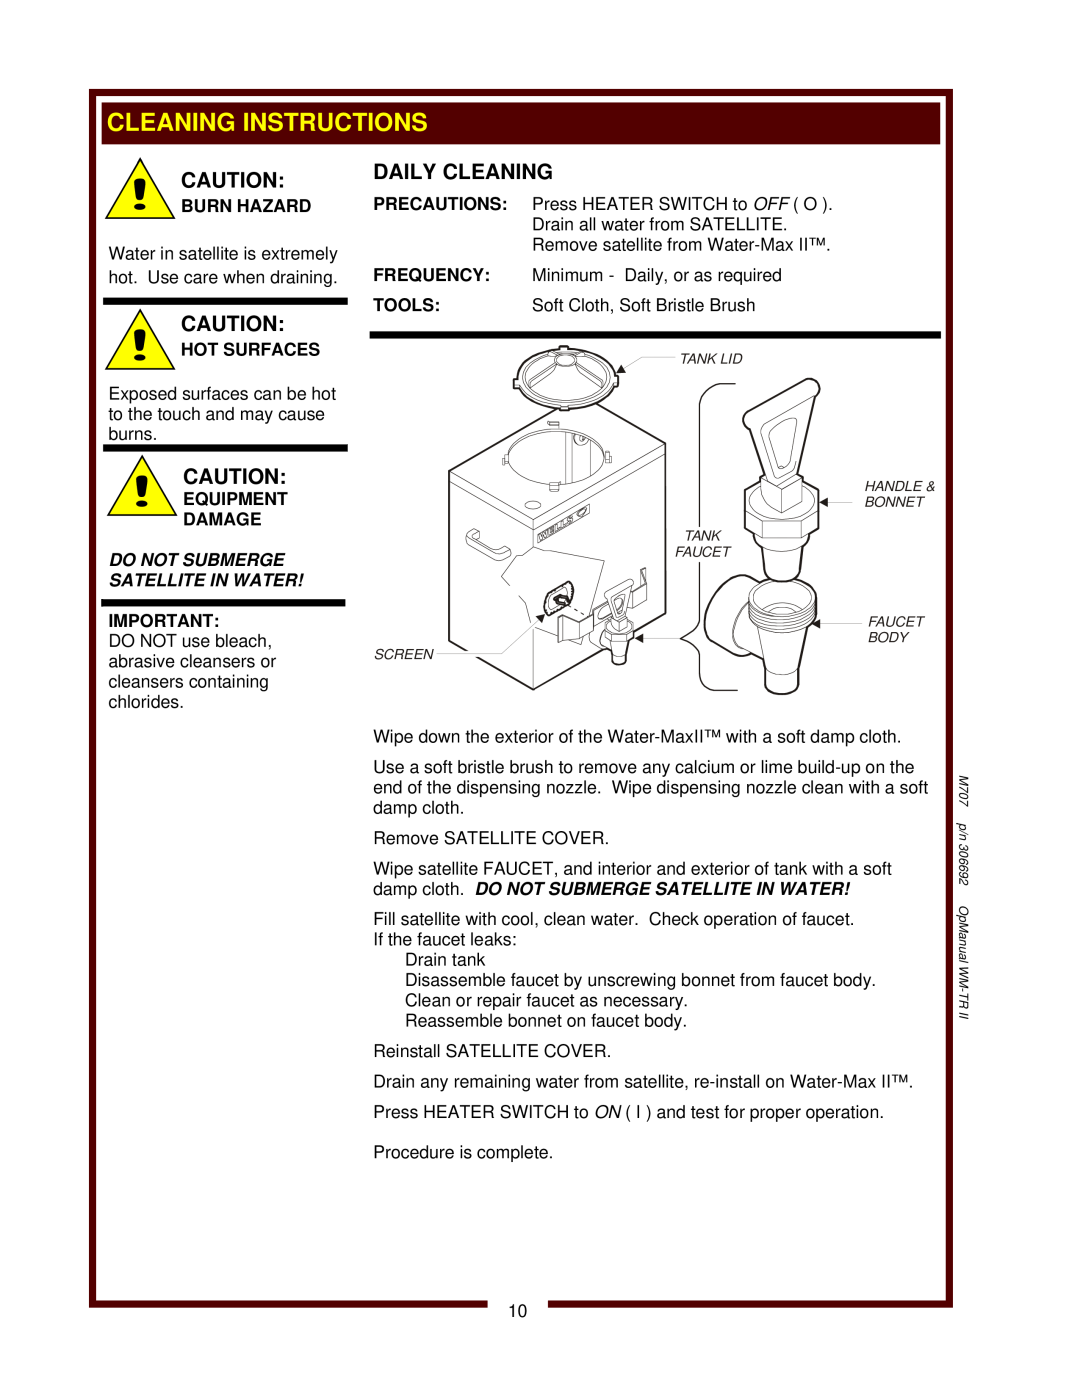 Wells WM-TR II Cleaning Instructions, Daily Cleaning, Hot Surfaces, Equipment Damage, Do Not Submerge Satellite In Water 